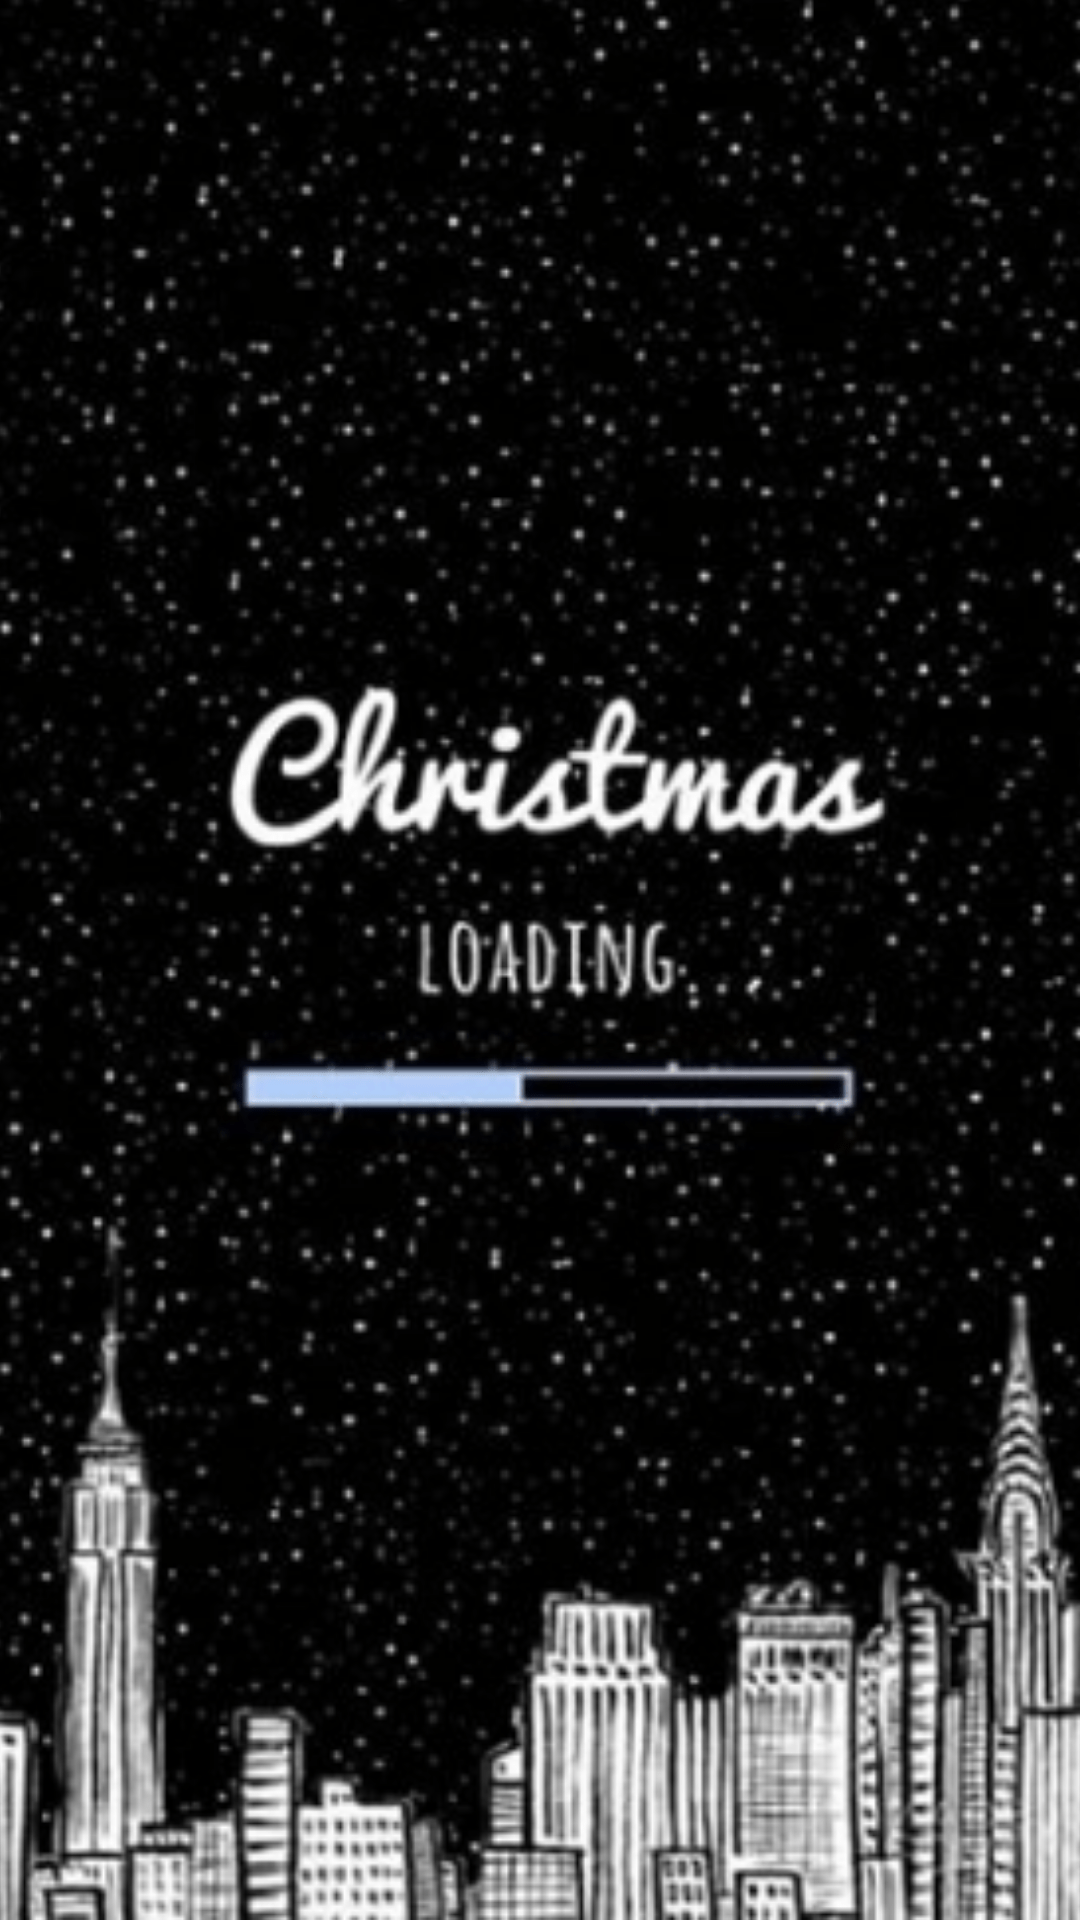 Christmas Wallpaper for iPhone- Free HD Downloads. Bridal Shower 101